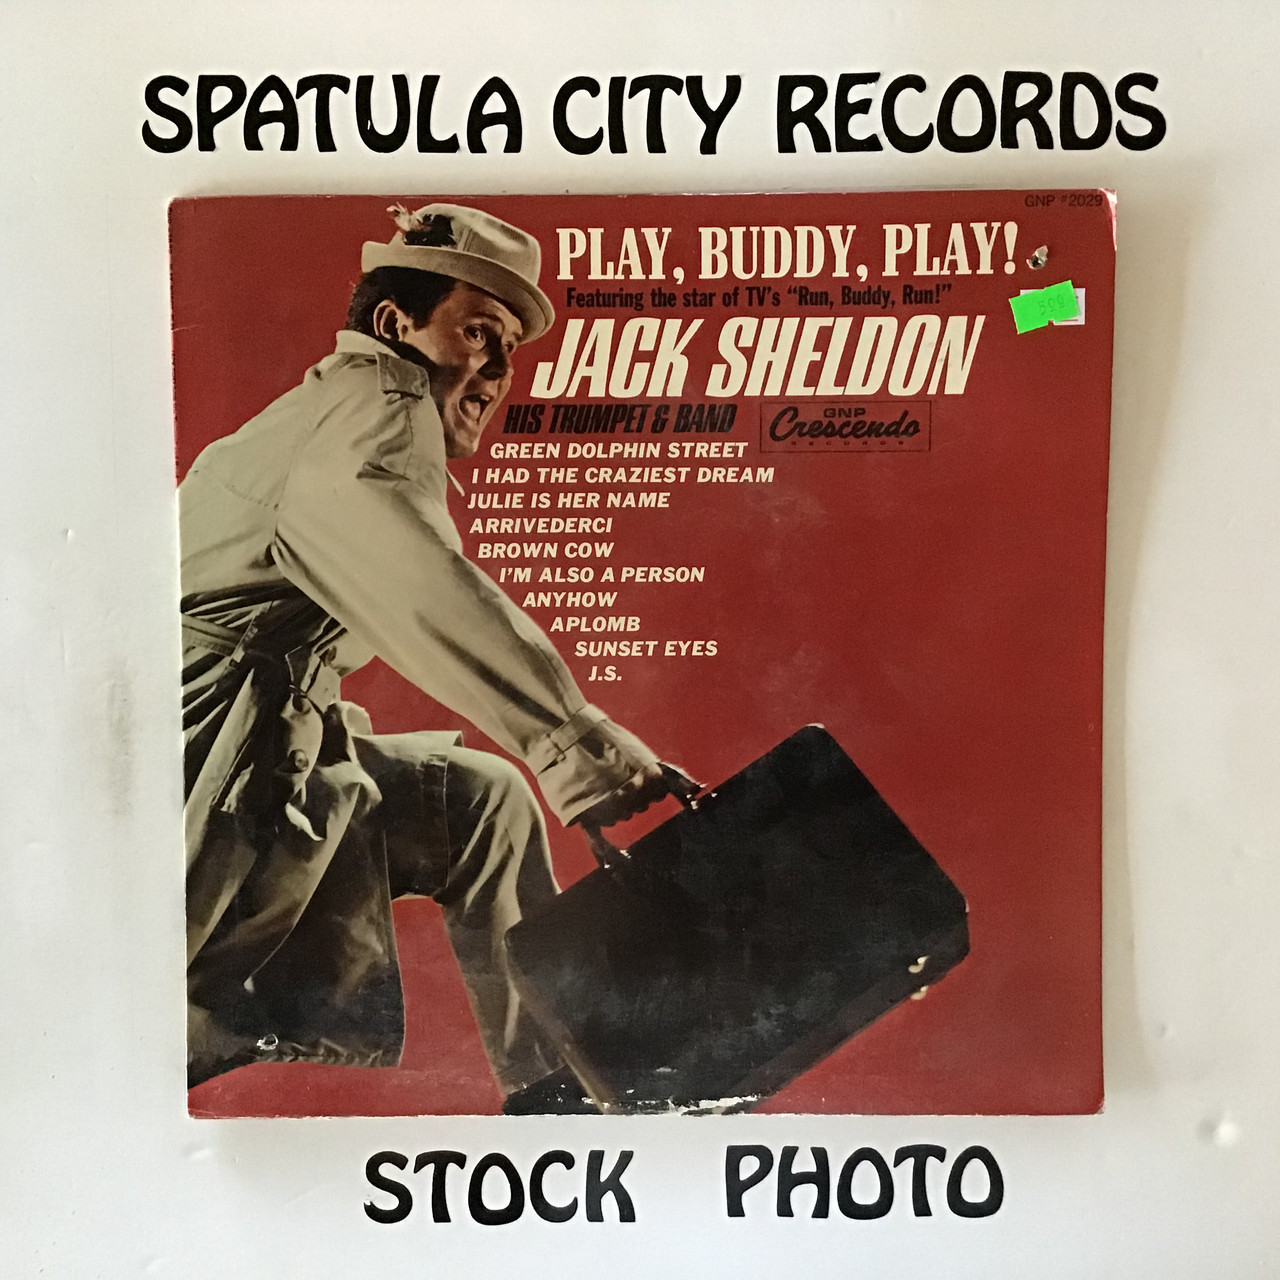 Jack Sheldon and His Trumpet and Band - Play, Buddy, Play! - vinyl record LP